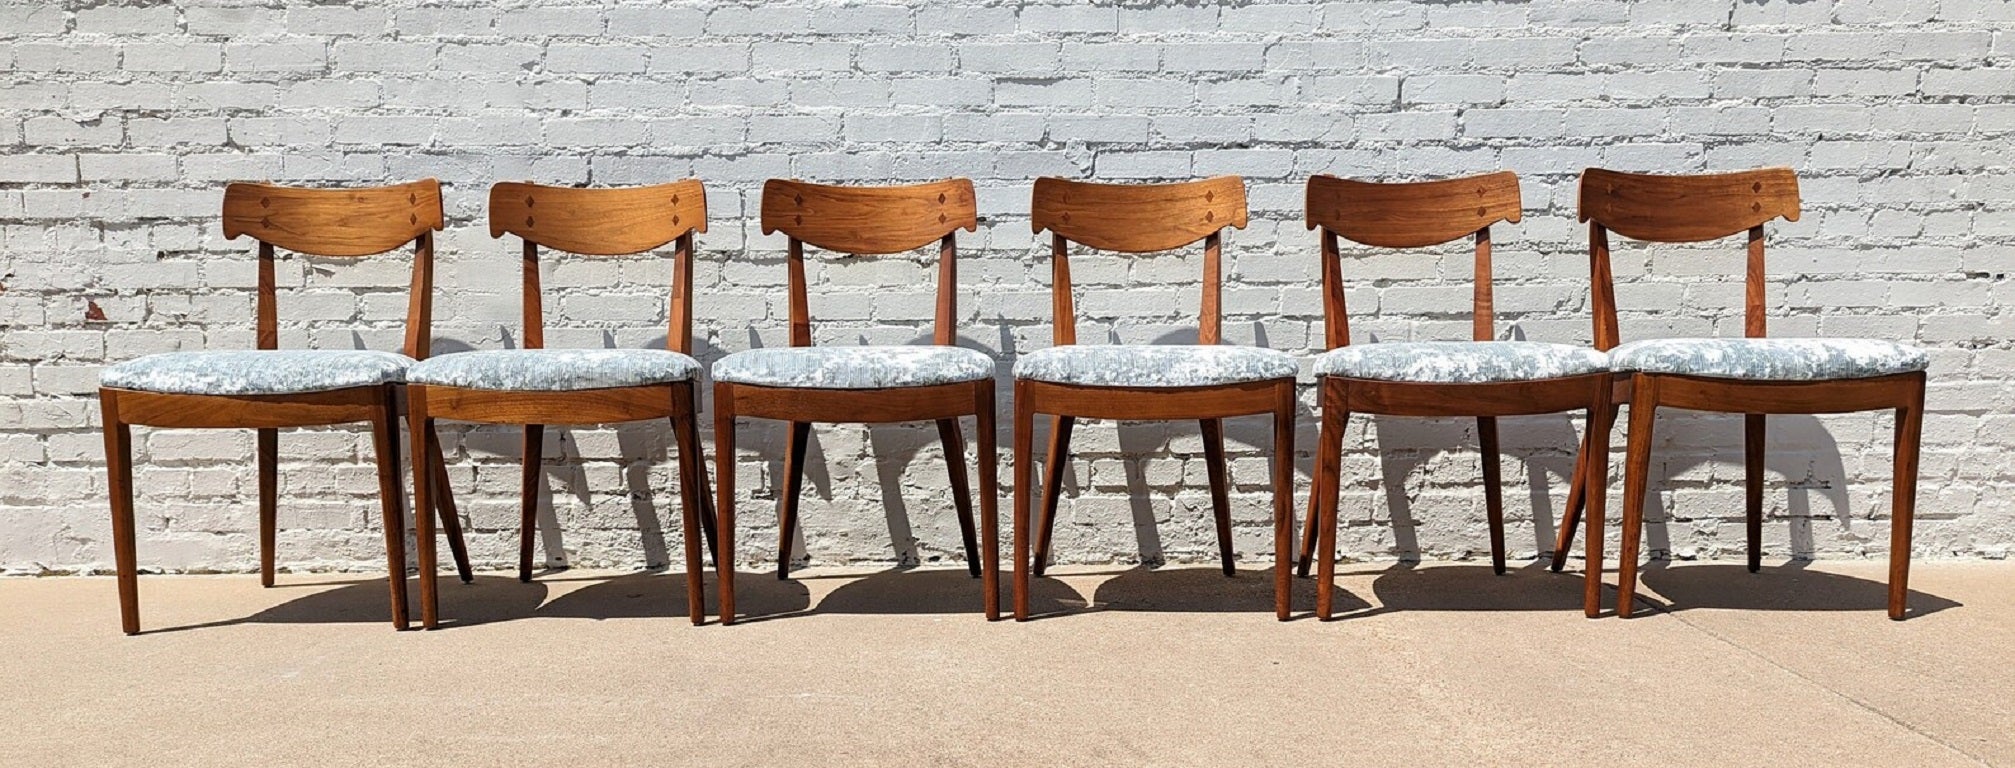 Mid Century Modern Drexel Declaration Dining Chairs
 
Above average vintage condition and structurally sound. Have some expected slight finish wear and scratching. Upholstery is new. Outdoor listing pictures might appear slightly darker or more red